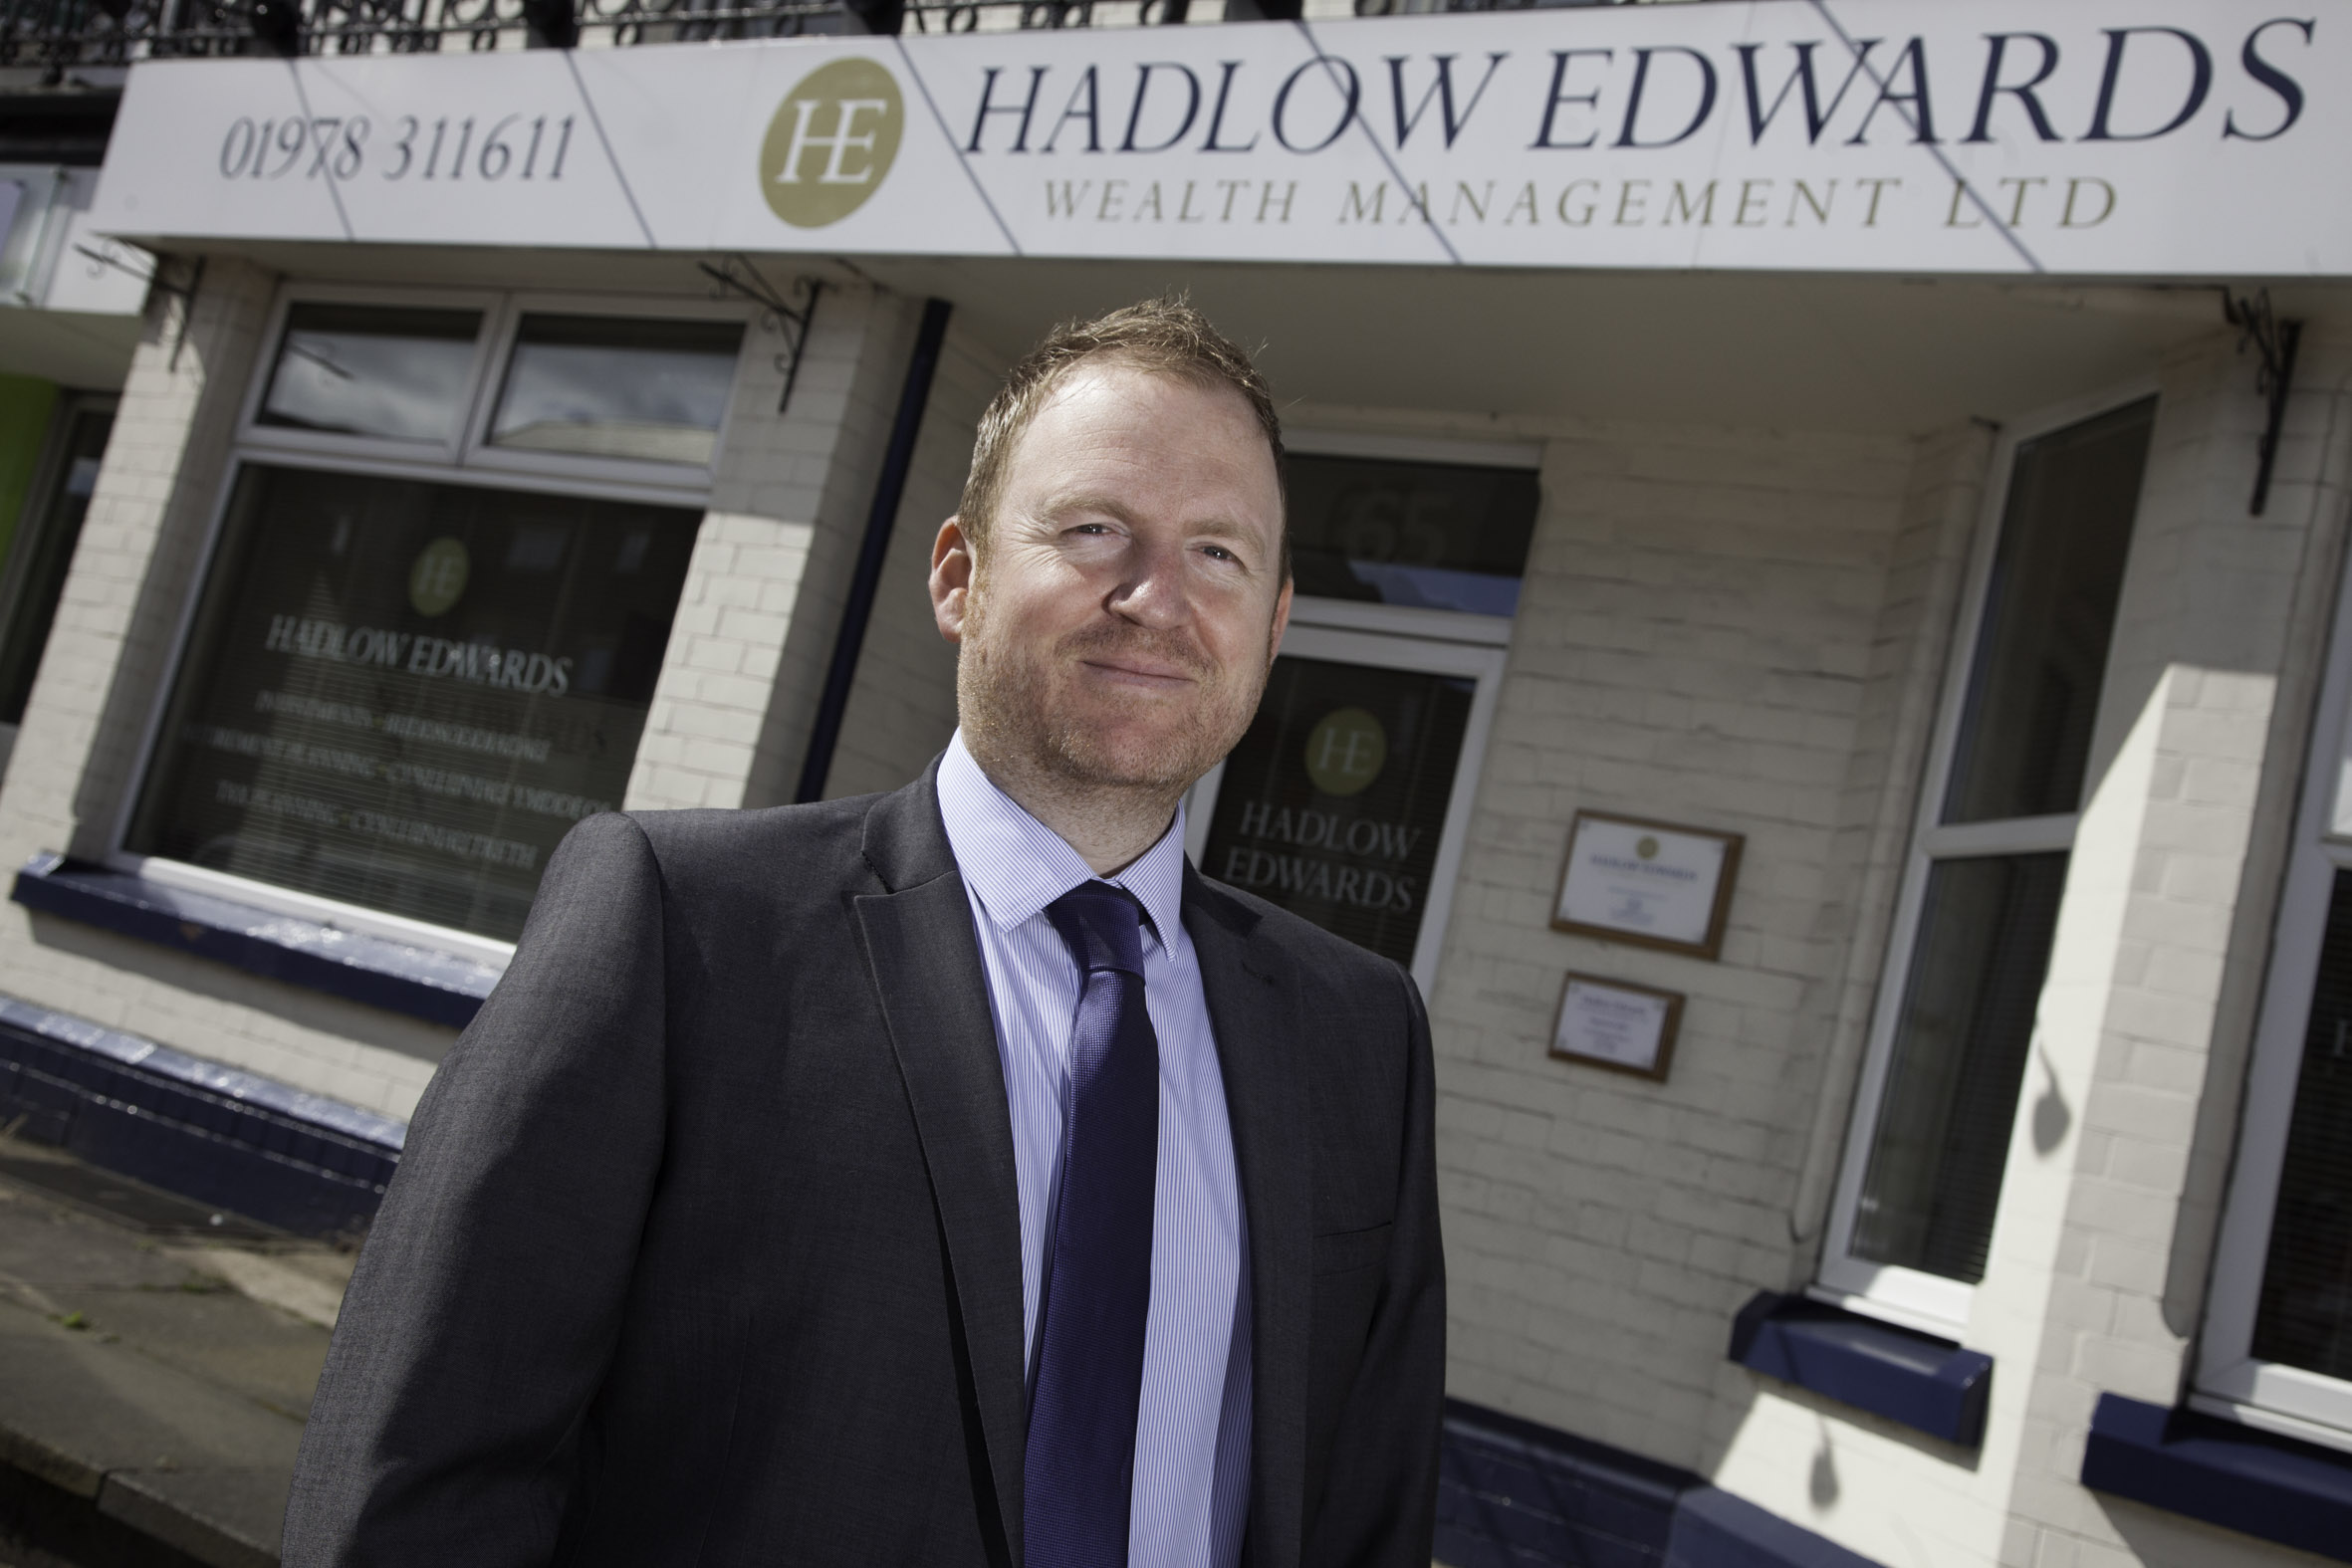 New mortgage adviser for top financial firm helps families build their dreams